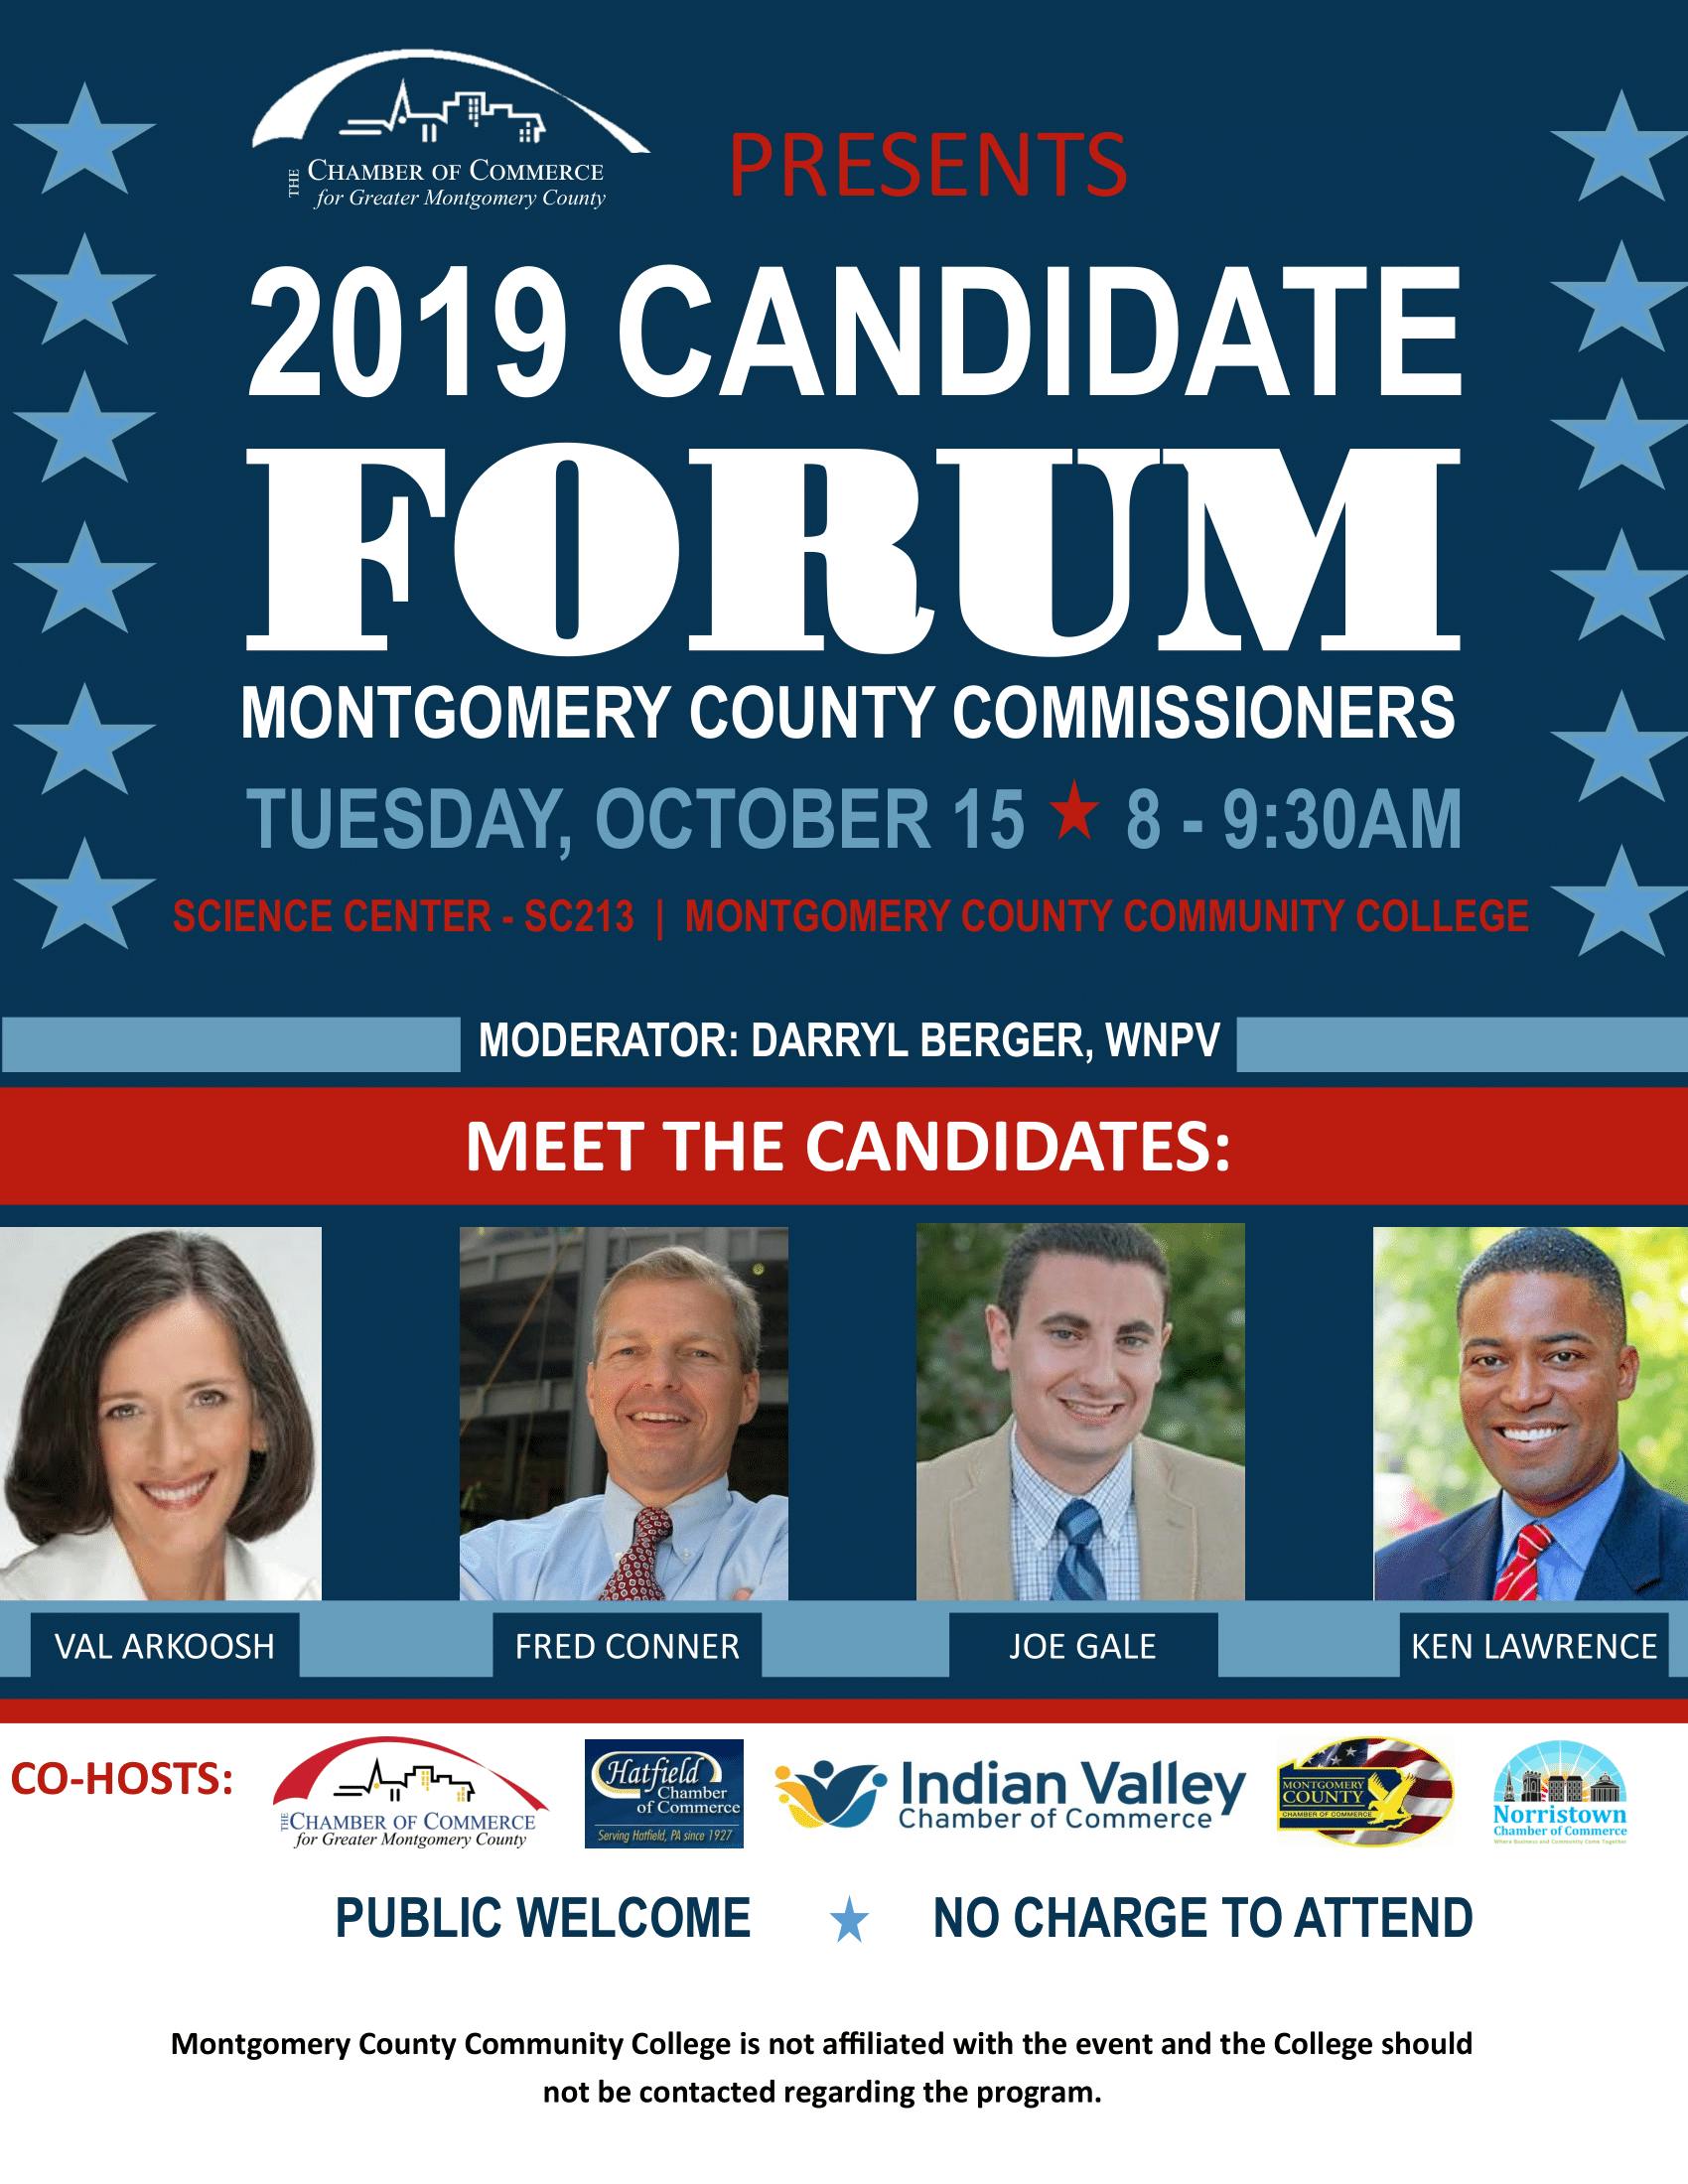 2019 Candidate Forum: Montgomery County Commissioners